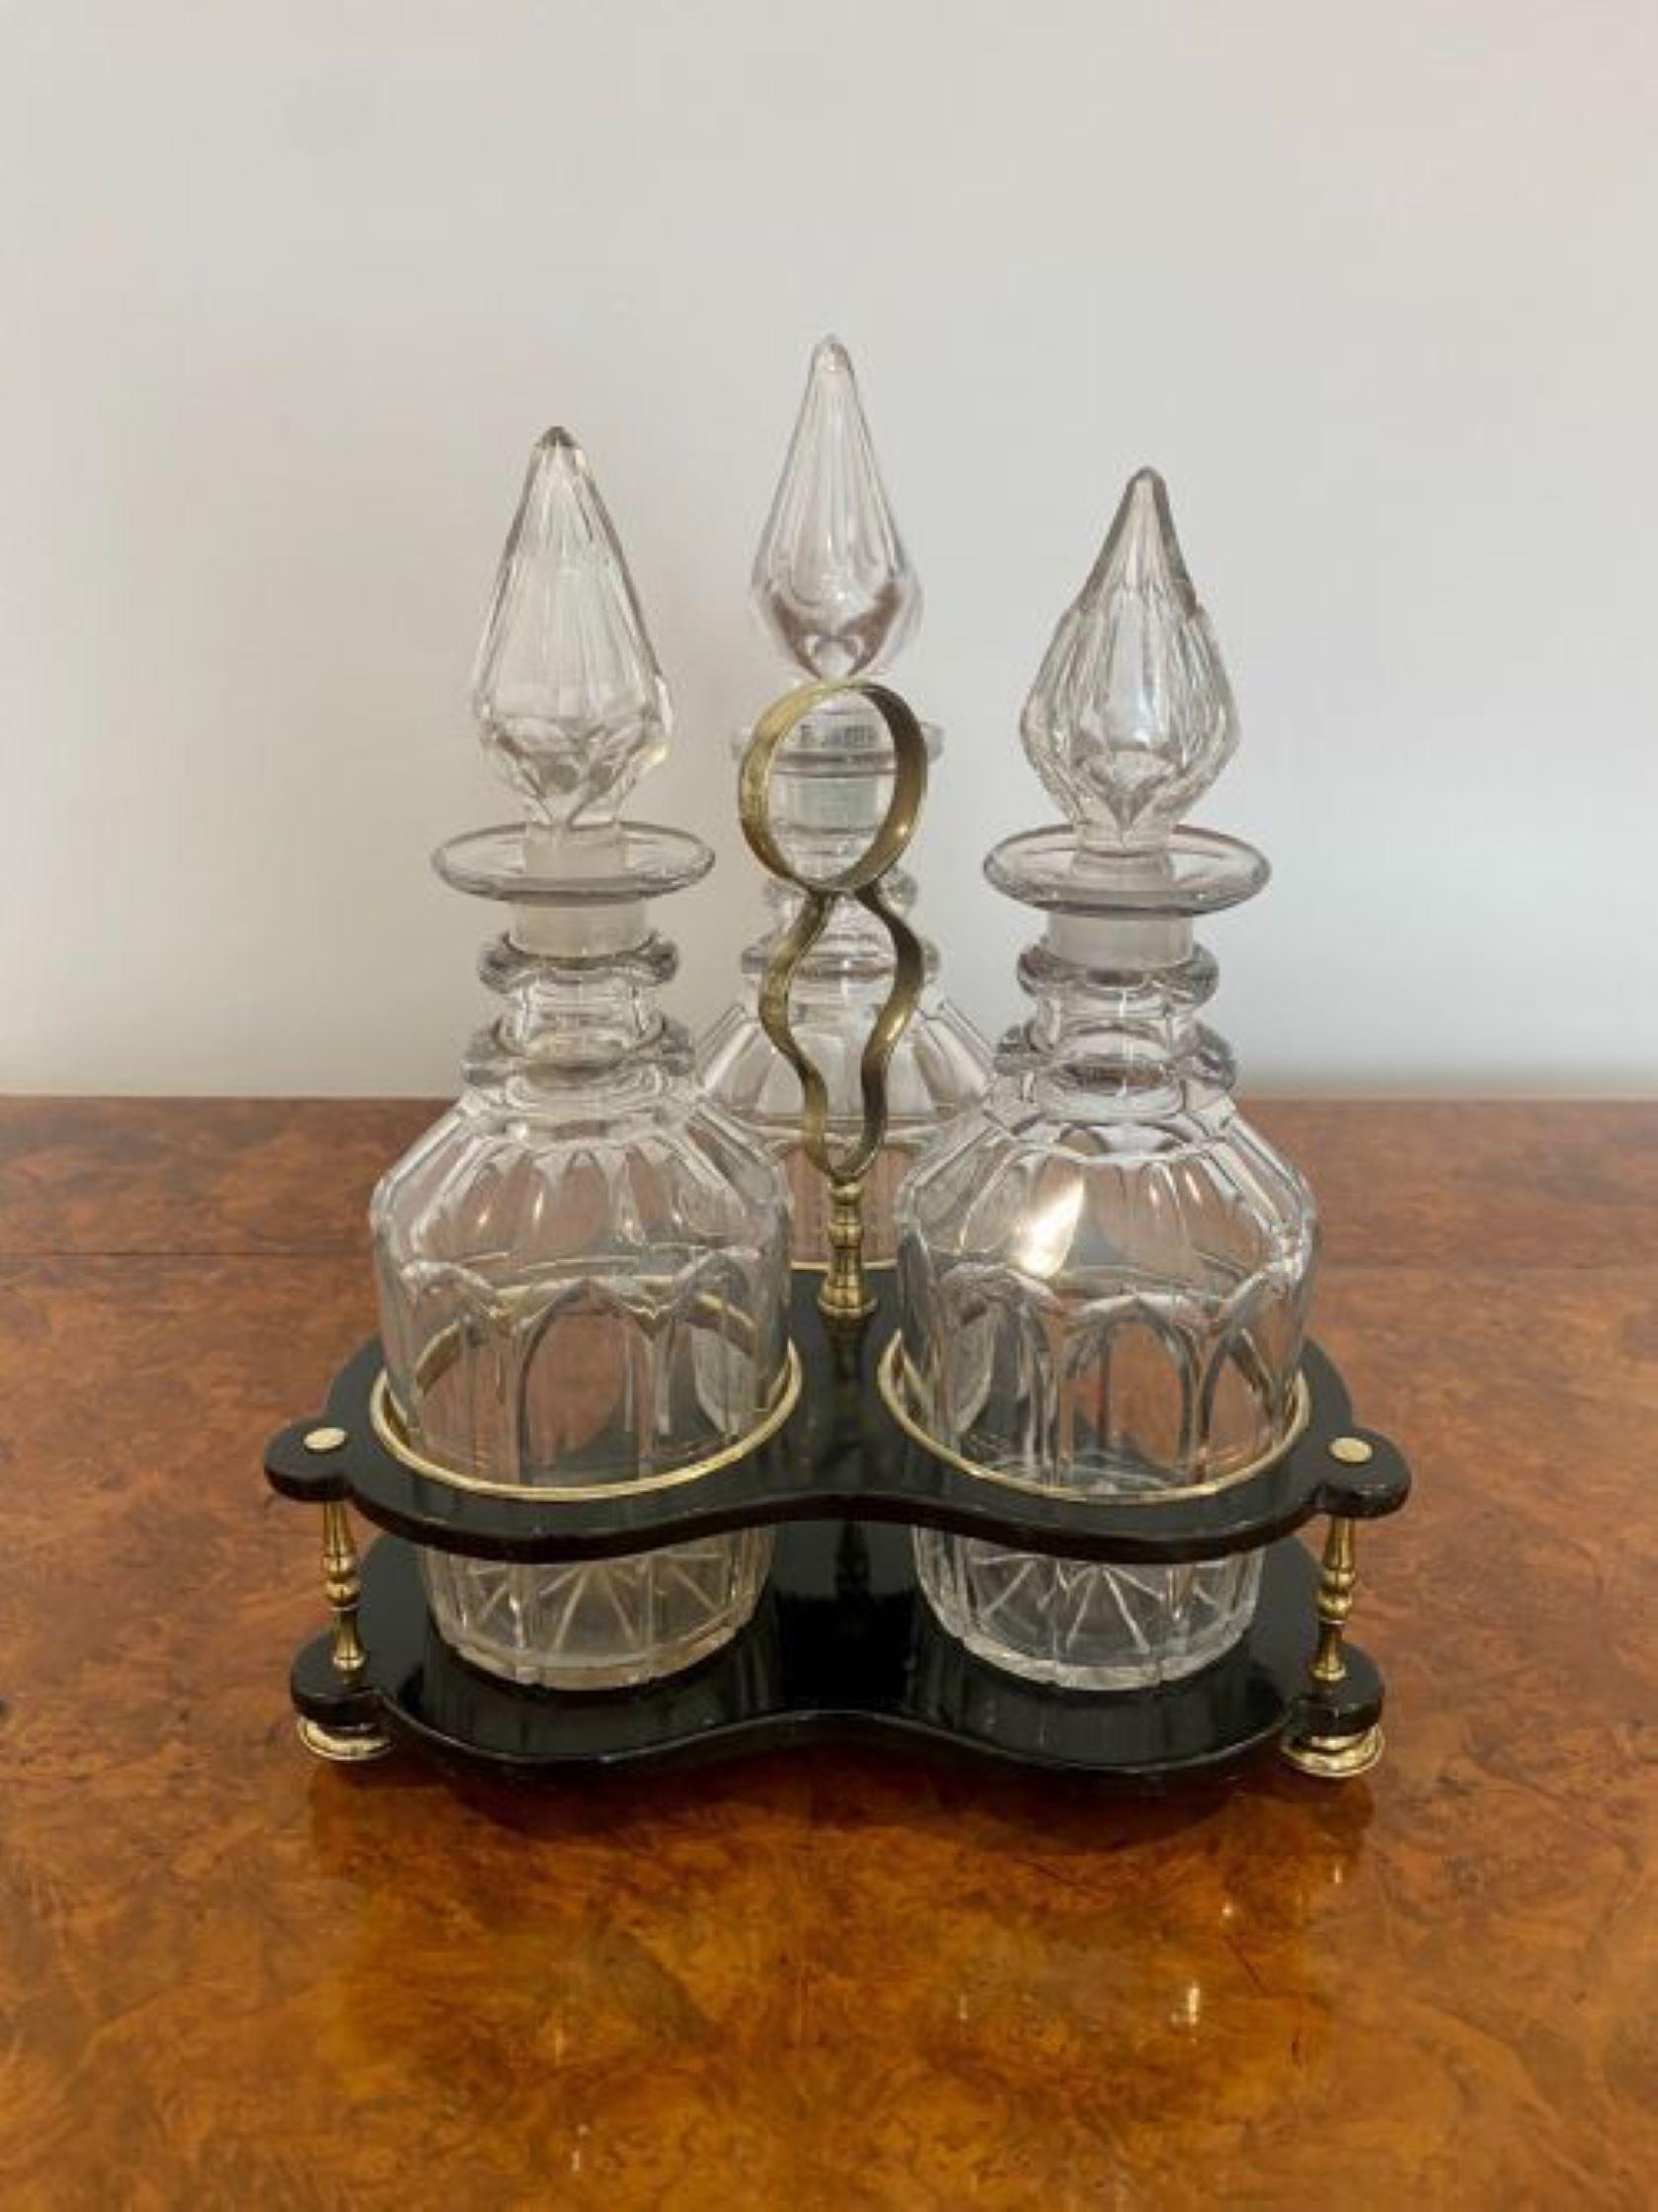 Antique Victorian quality decanter stand with three original cut glass decanters. Quality lacquered decanter stand with three brass columns, feet and a shaped carrying handle, holding the three original cut glass decanters with their original